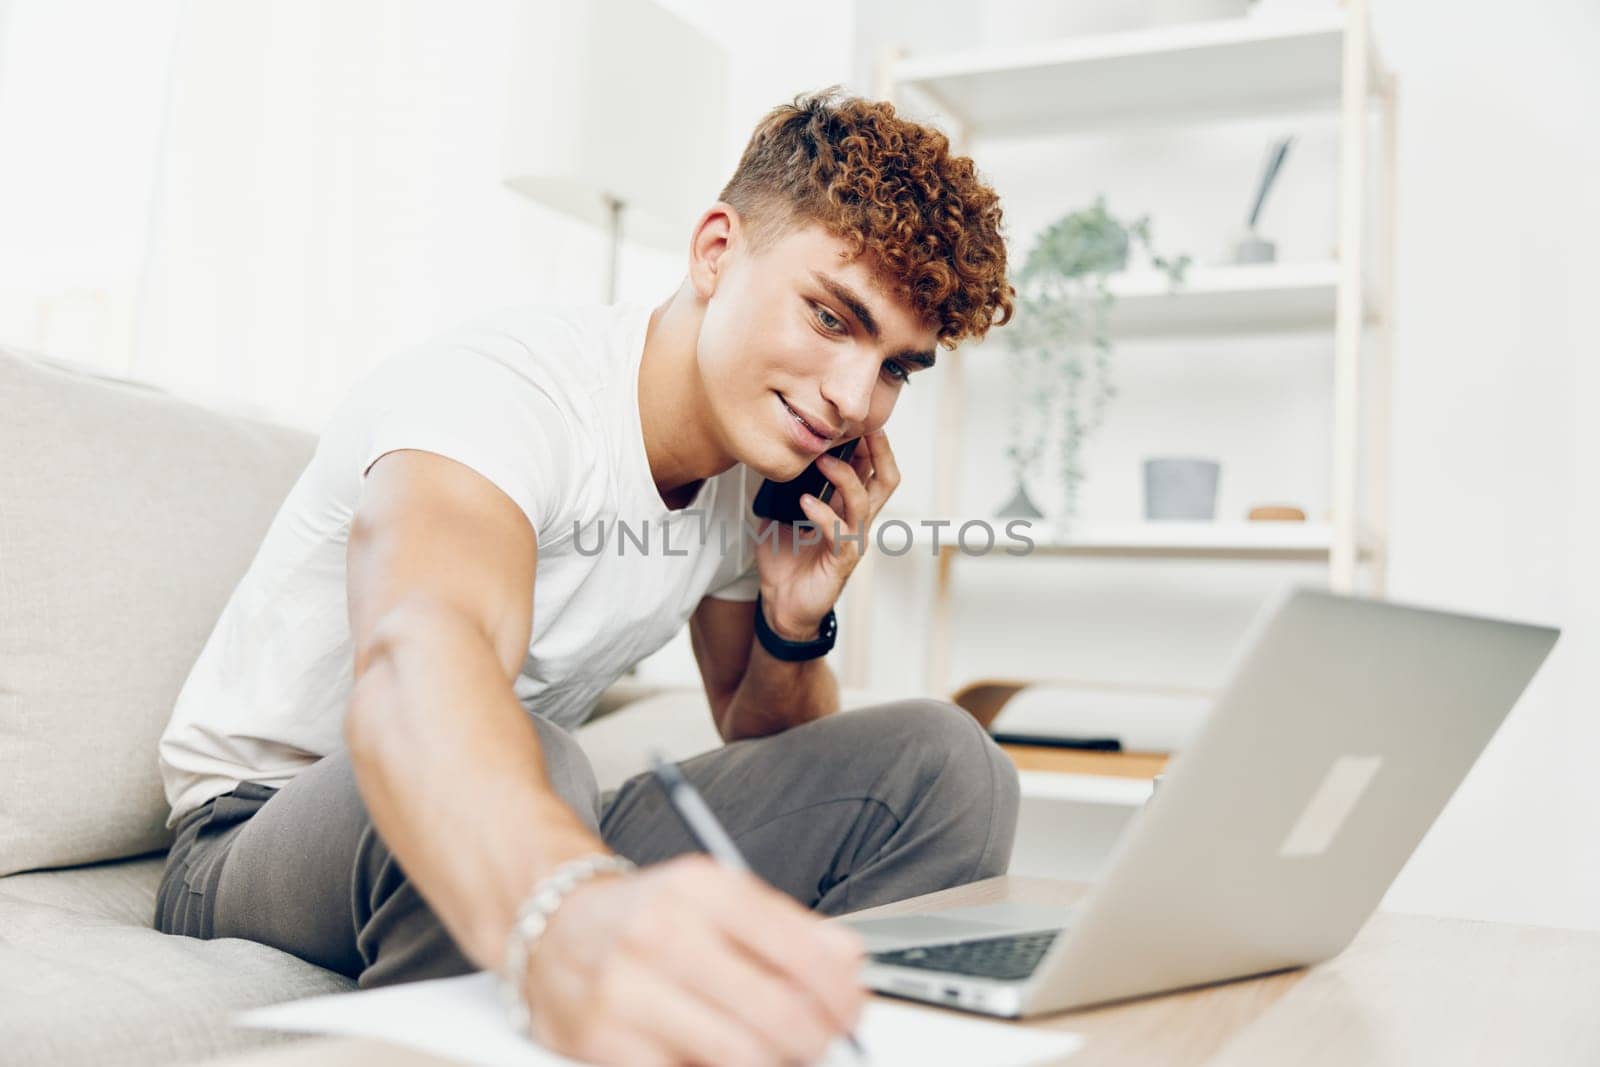 man internet cell male lifestyle sitting online blissful person technology cellphone talking laptop couch text message using student holding freelancer